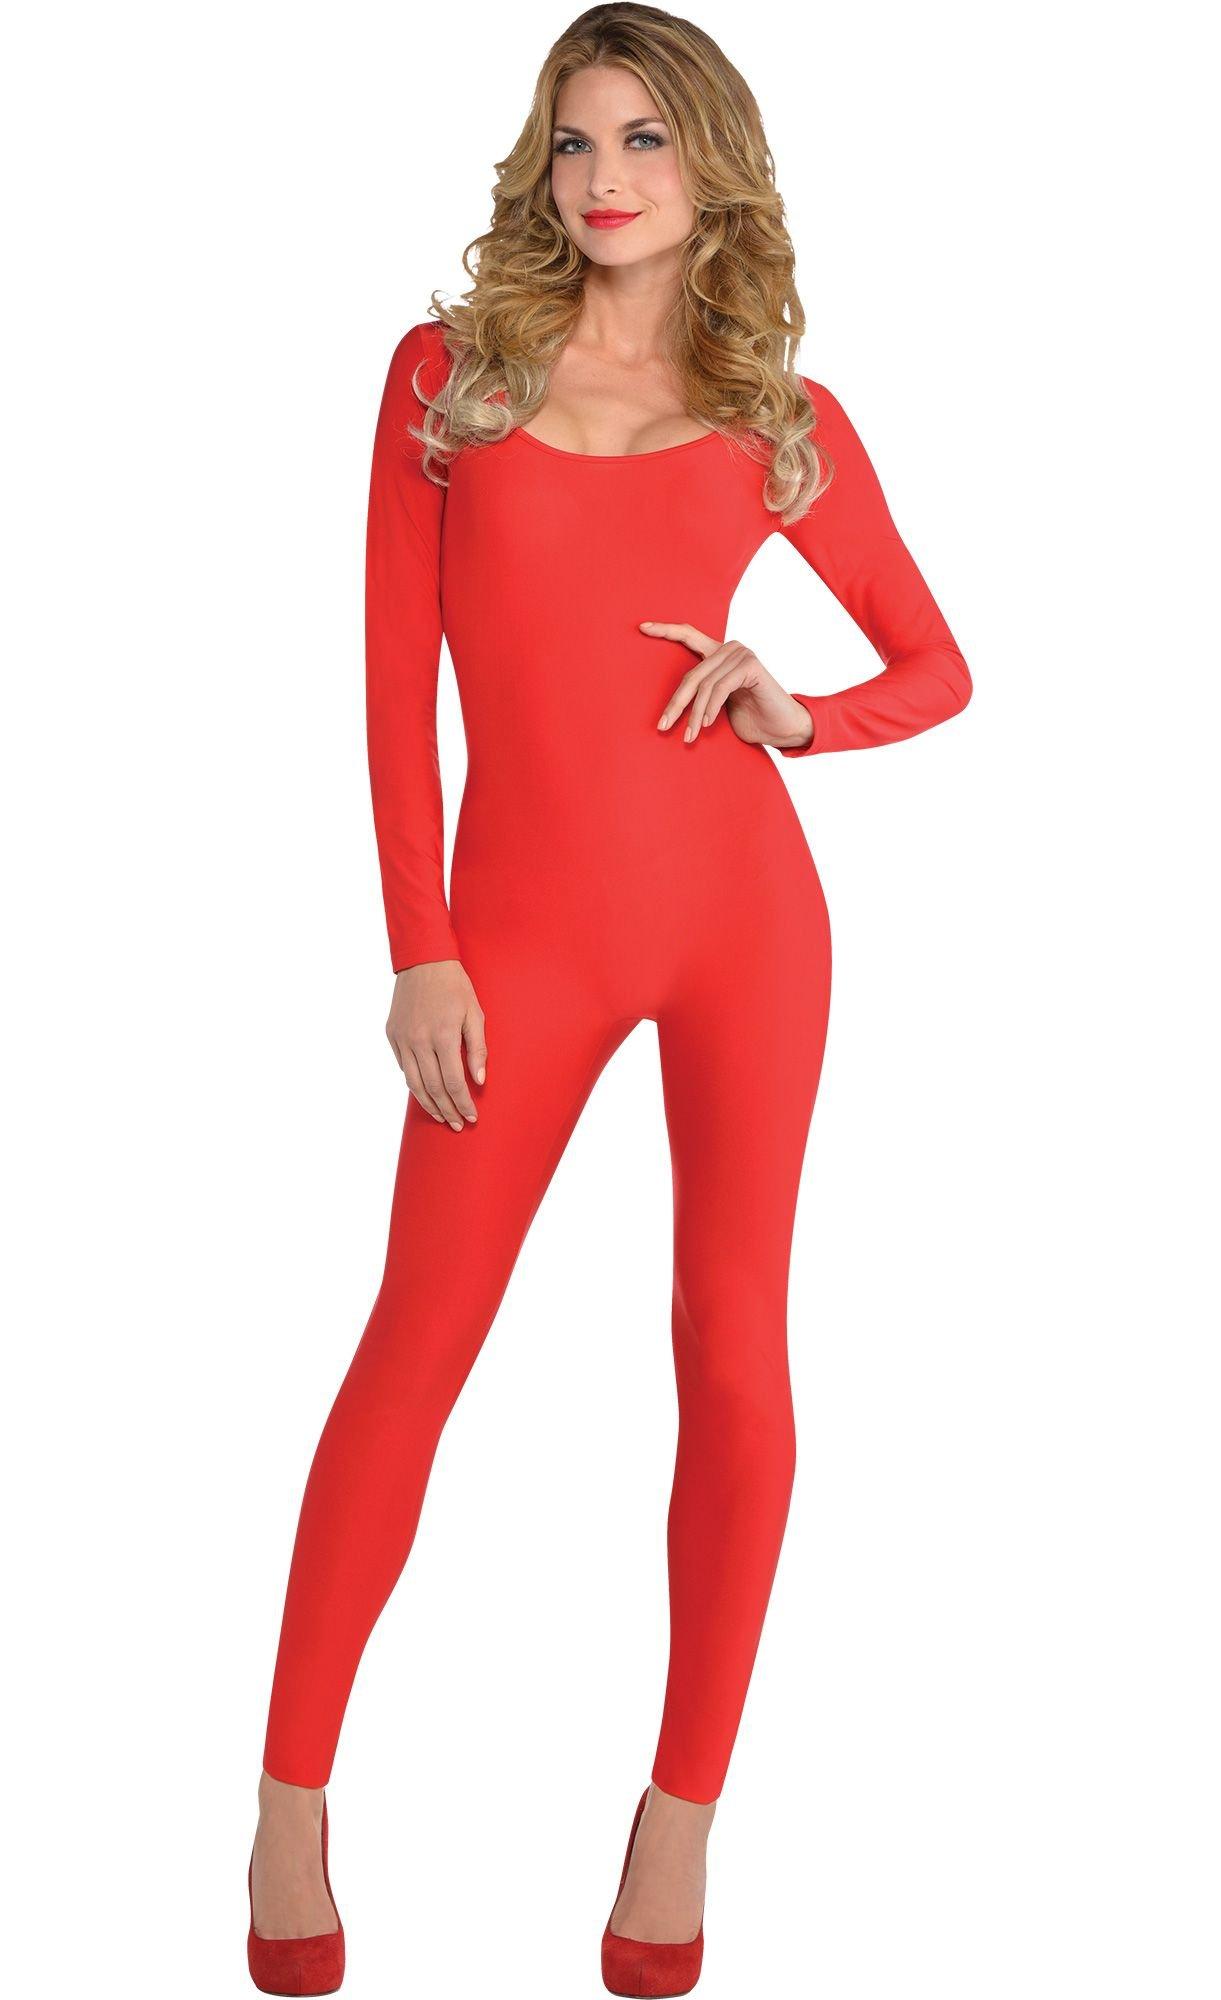 Red Bodysuit (44-48) Extra Large Adult Costume - Bartz's Party Stores